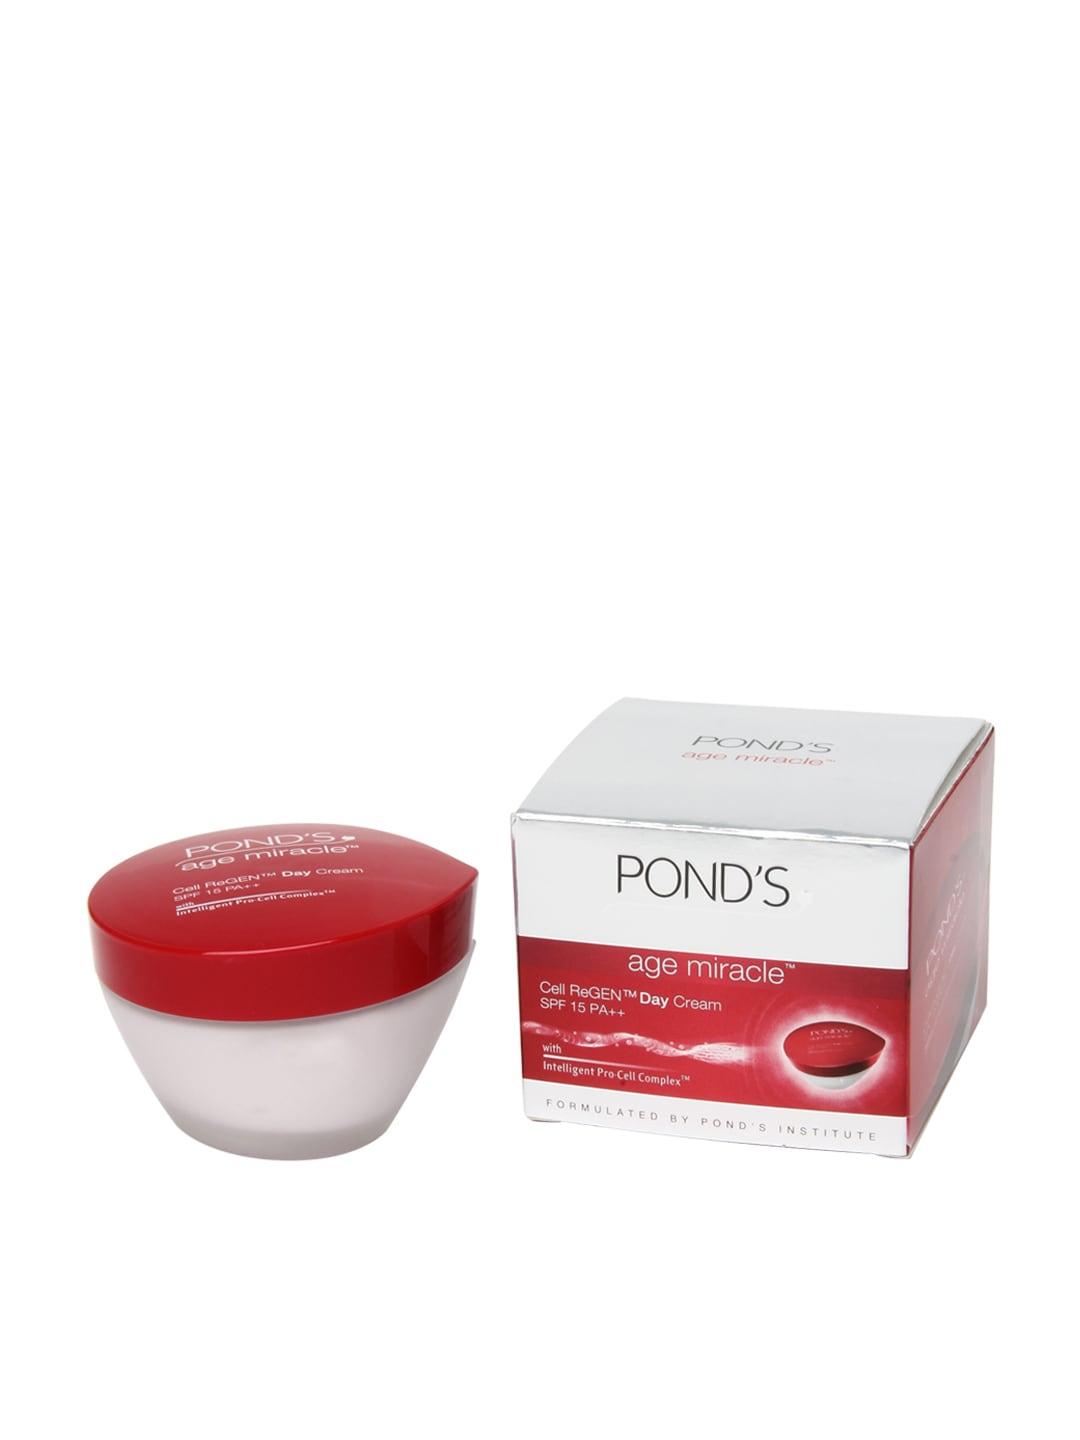 ponds-age-miracle-cell-regen-day-cream-35-g